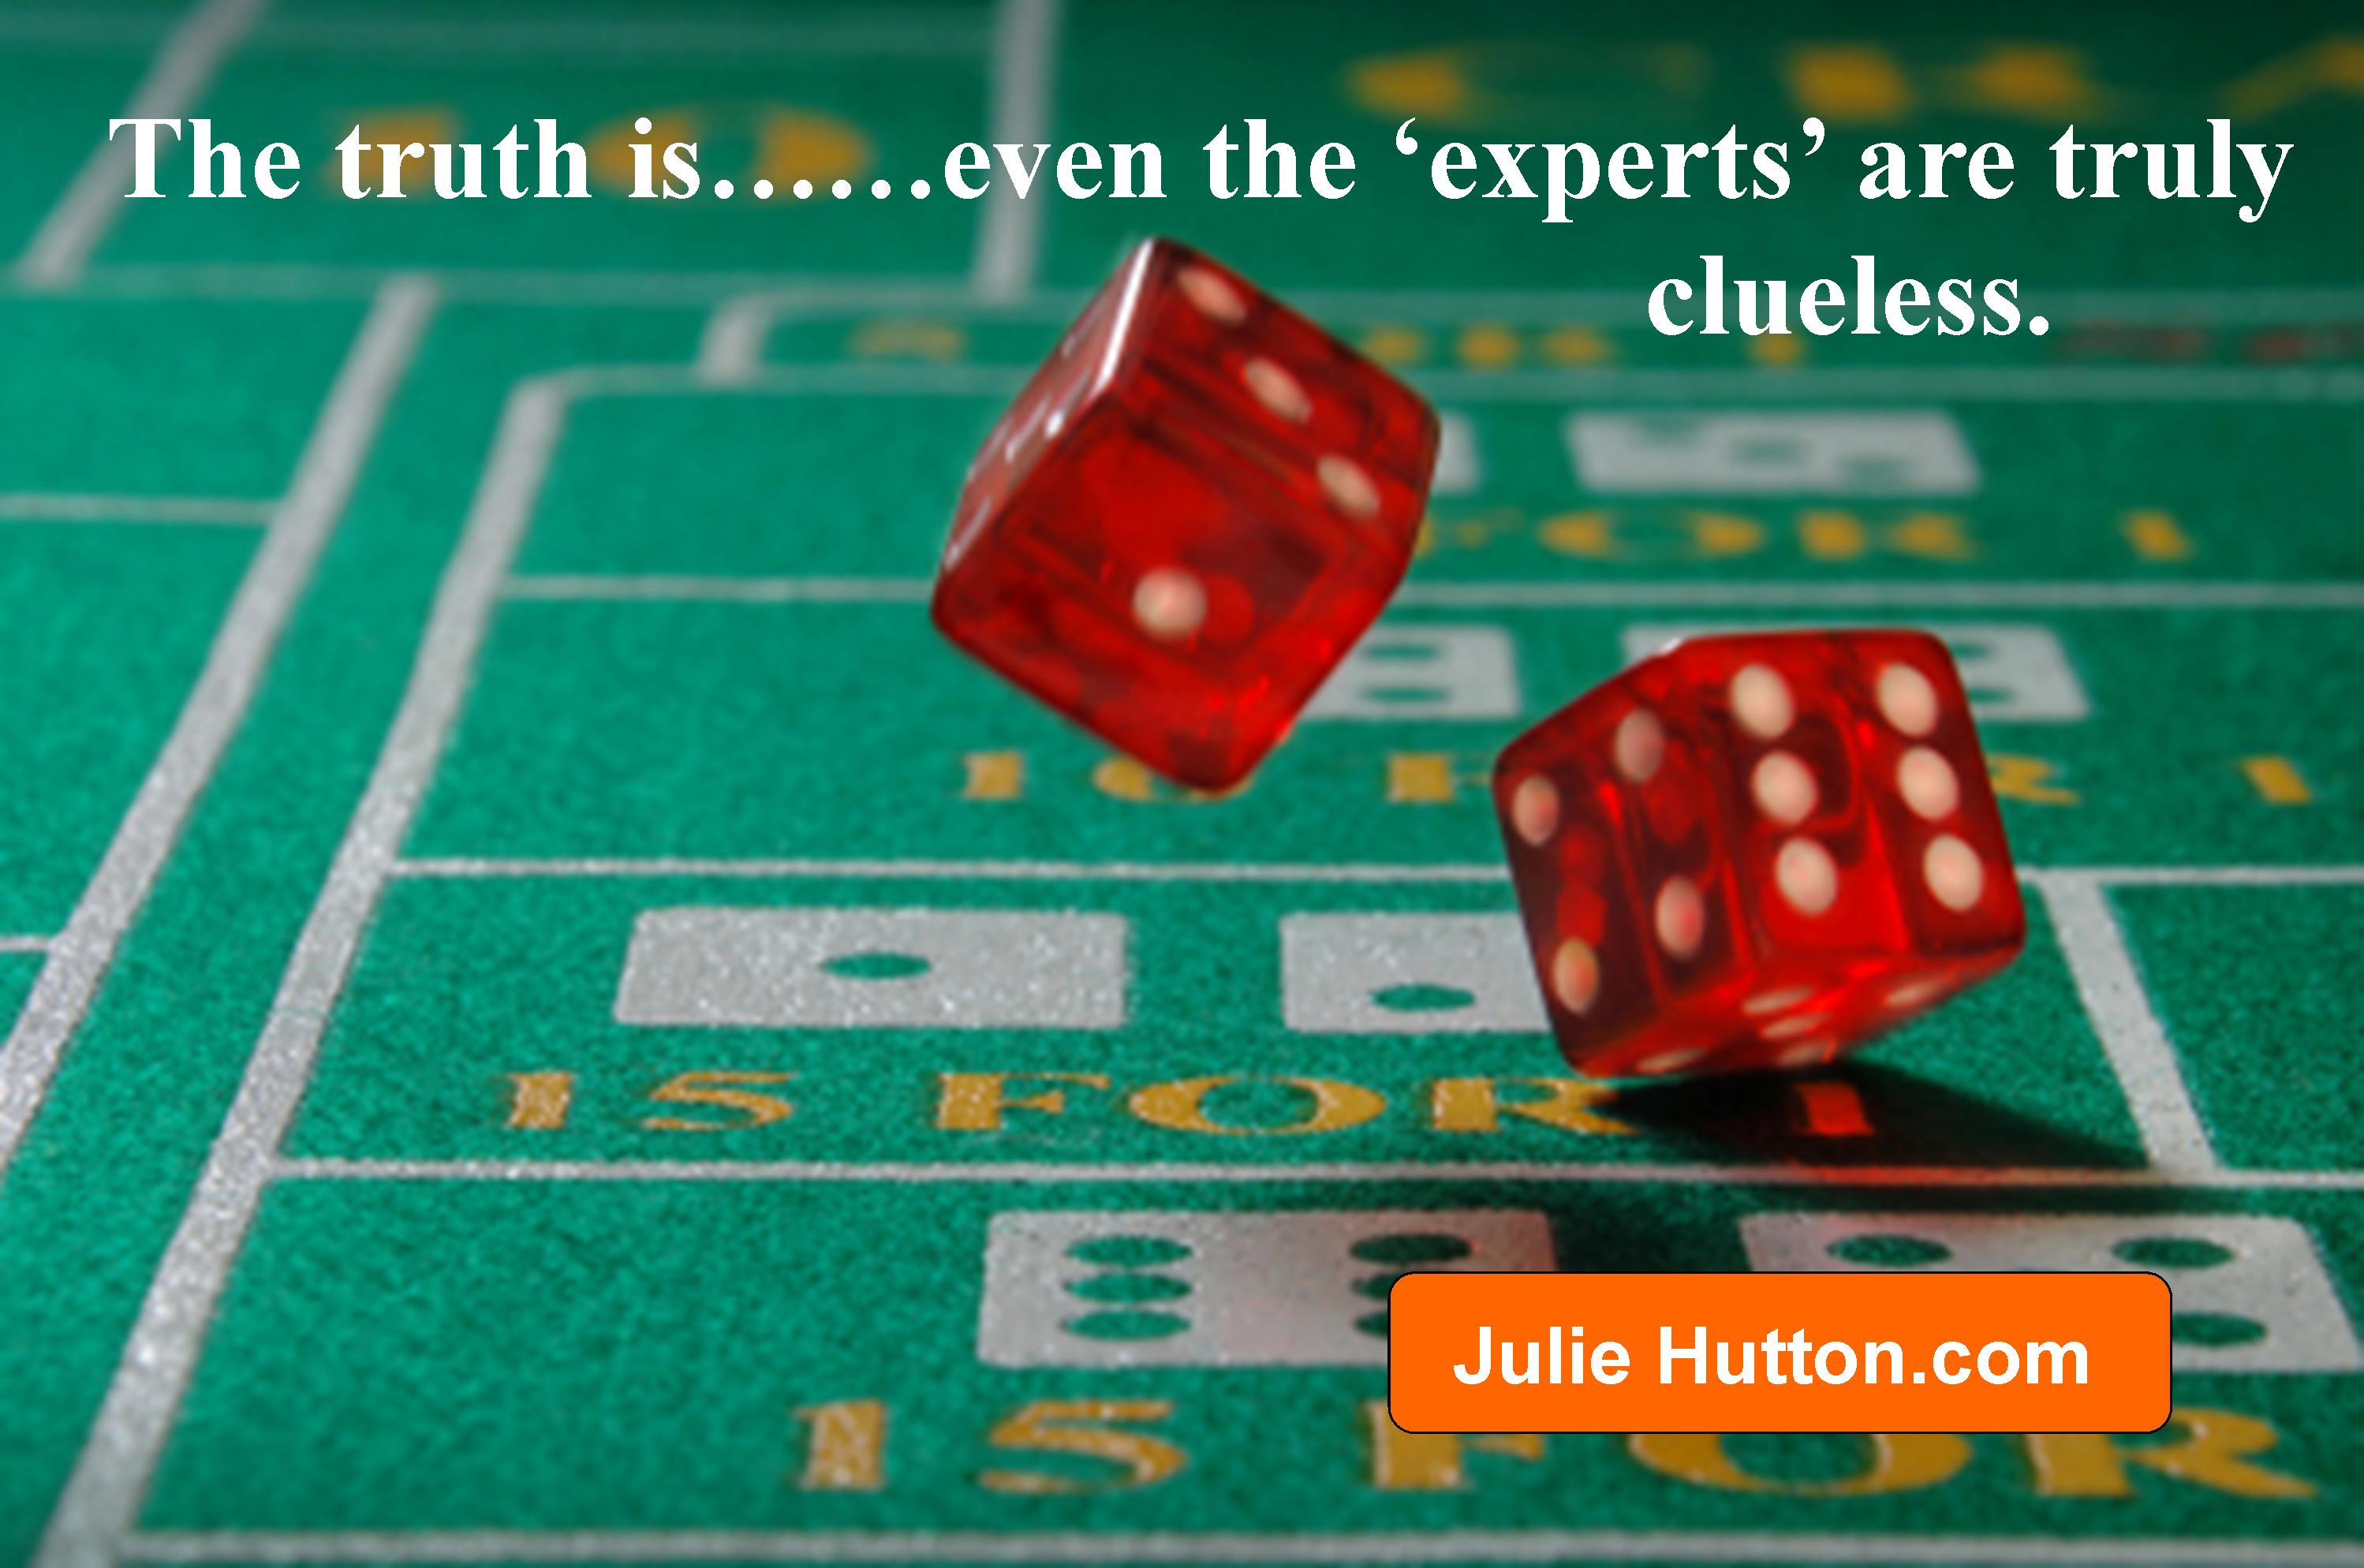 the-truth-is-even-the-experts-are-truly-clueless-crap-shoot-julie-hutton.jpg